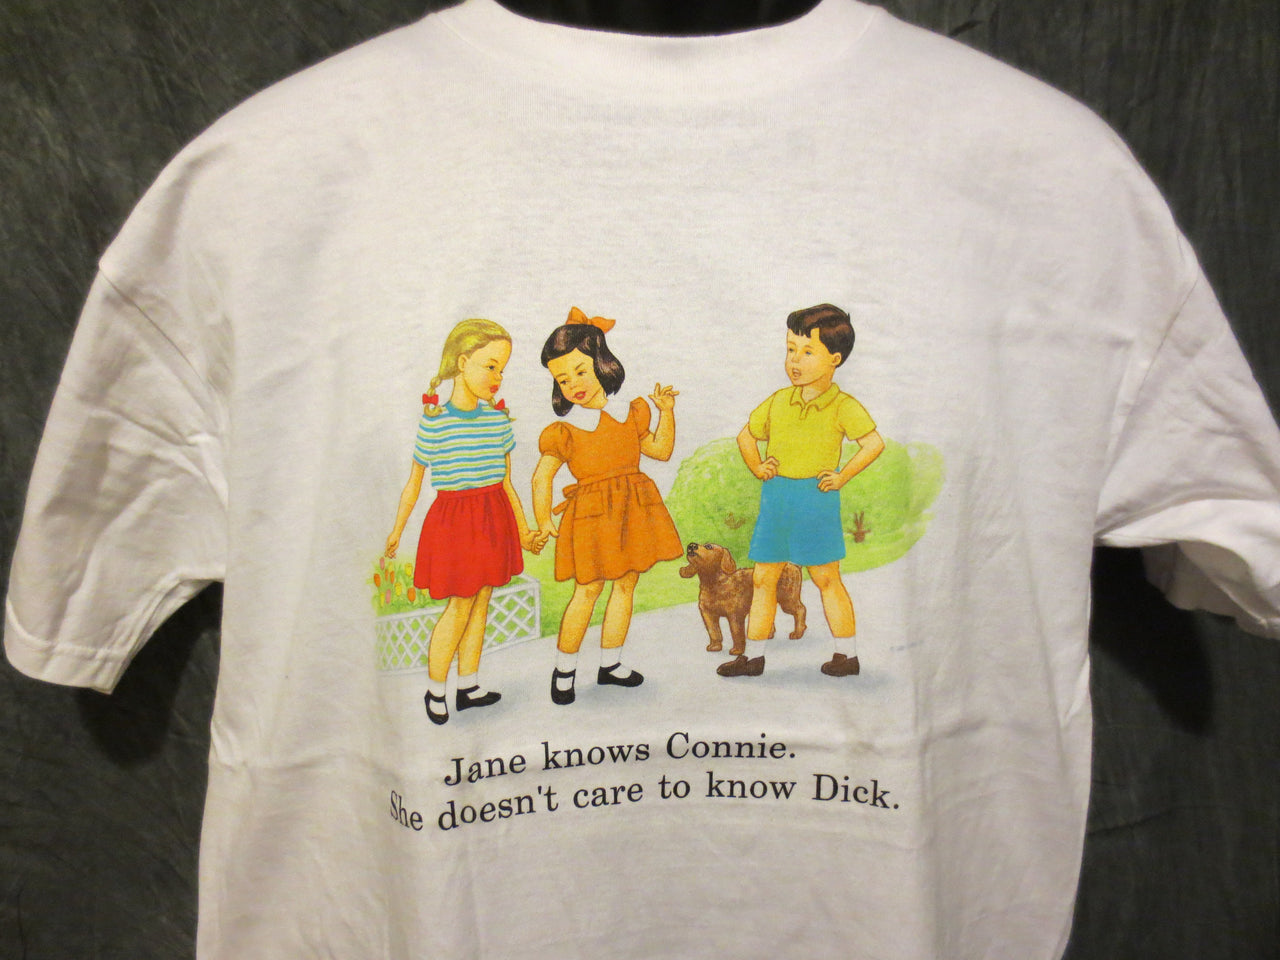 Childhood Jane Knows Connie She Doesn't Care to Know Dick Tshirt - TshirtNow.net - 6